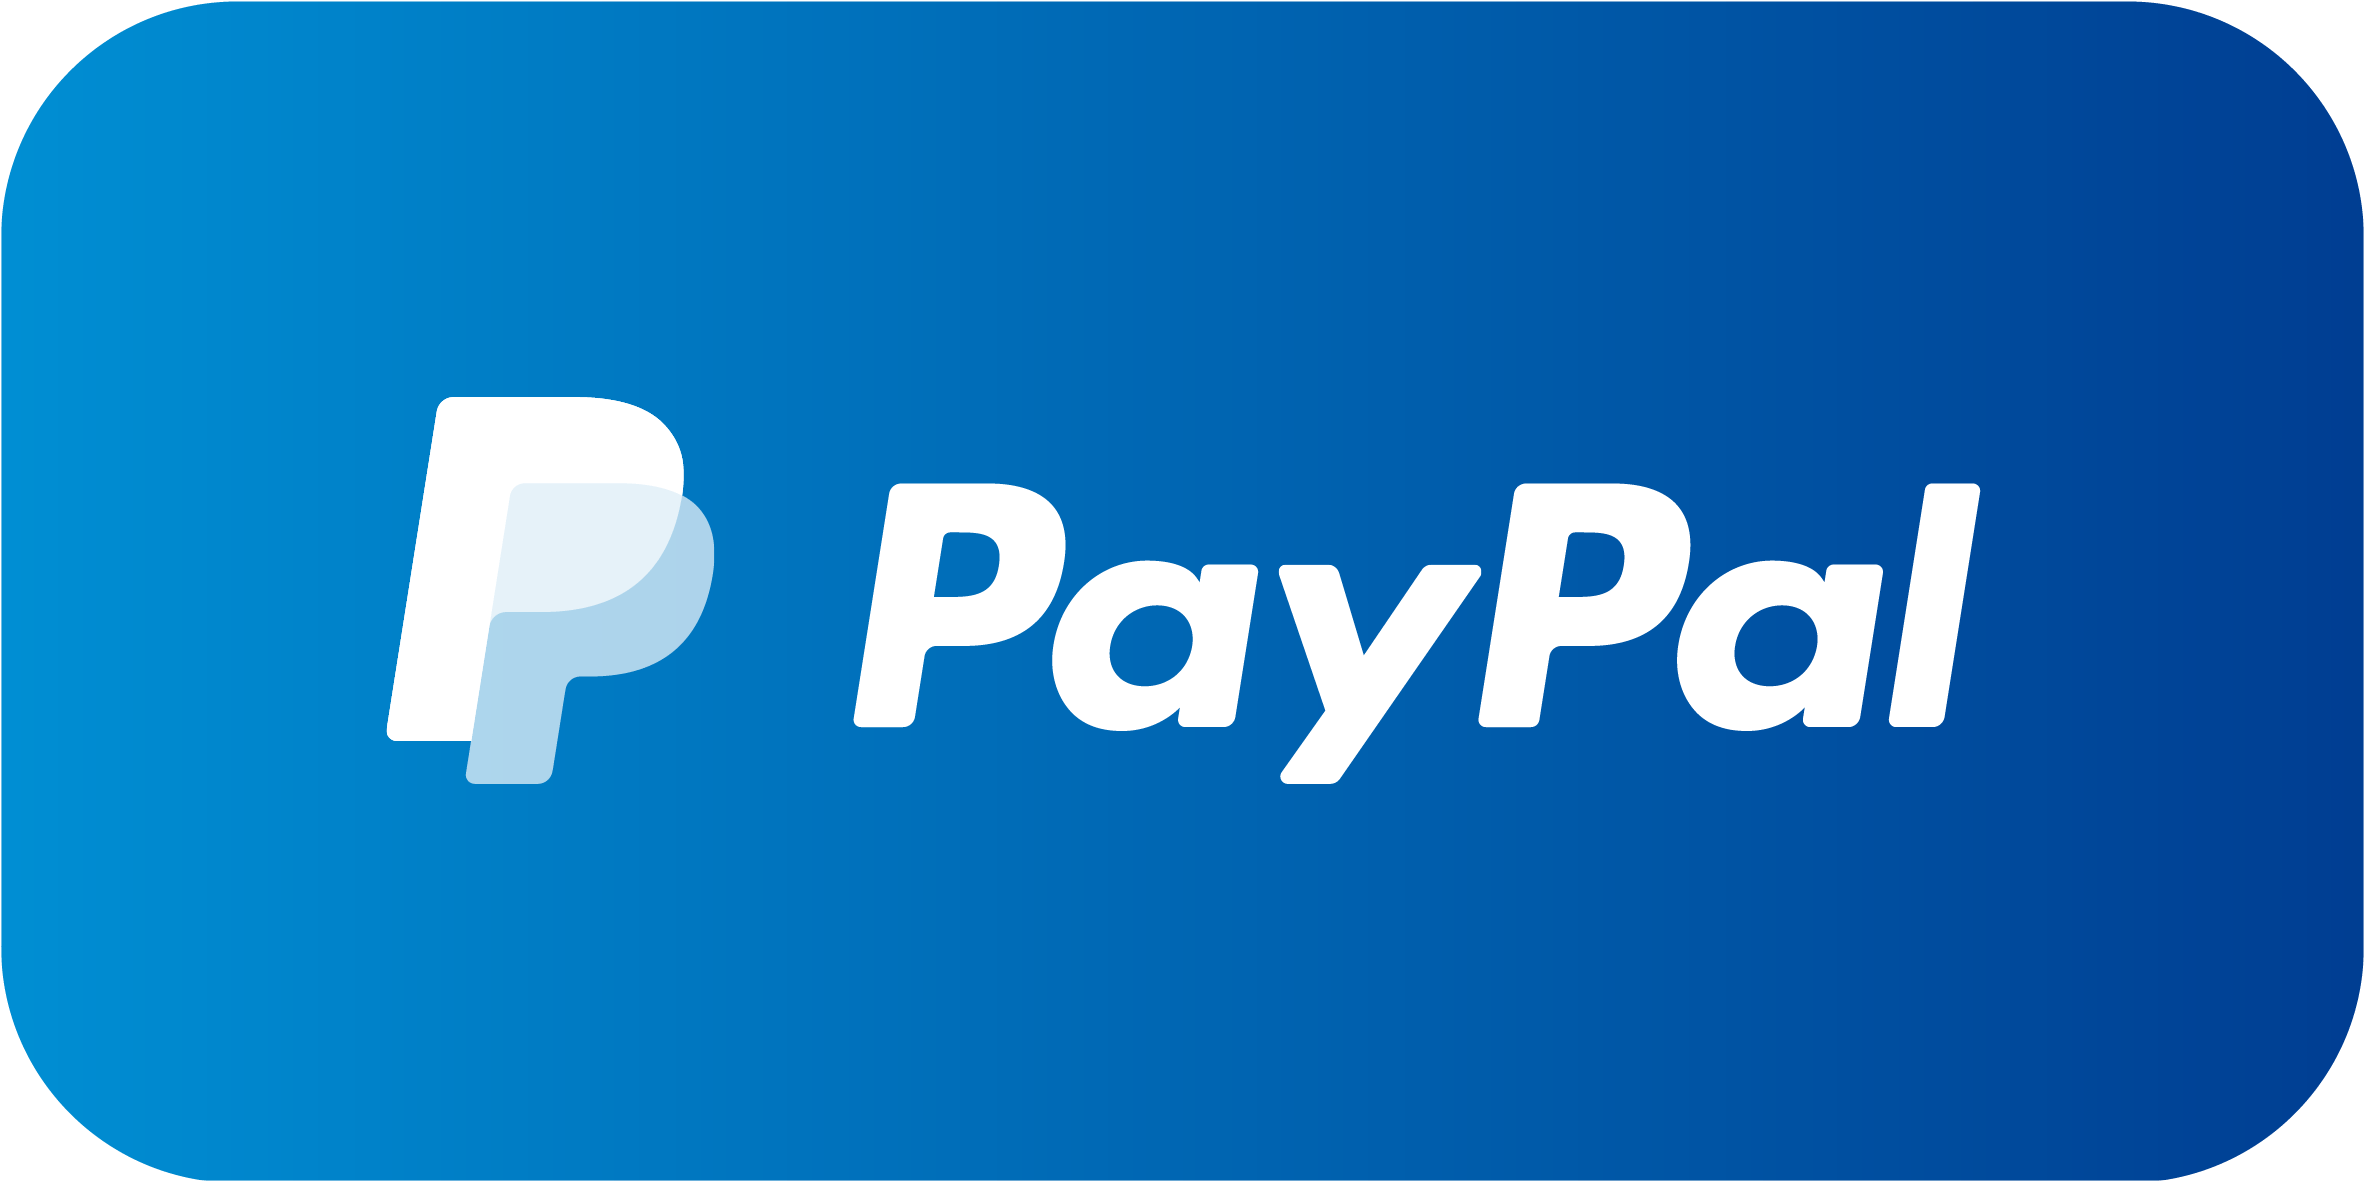 PayPal payments accepted